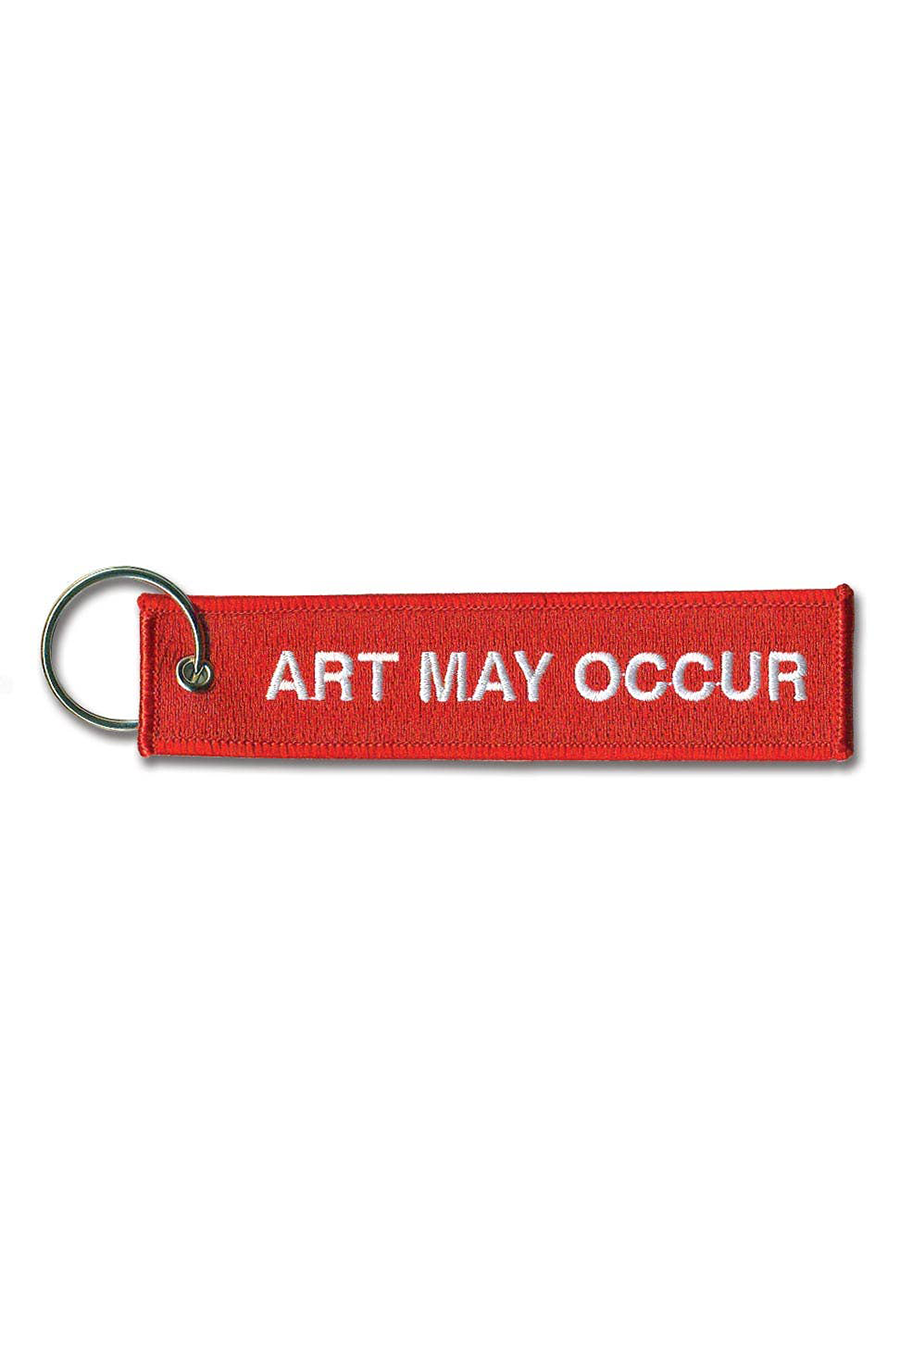 Art May Occur Keychain - Main Image Number 1 of 1